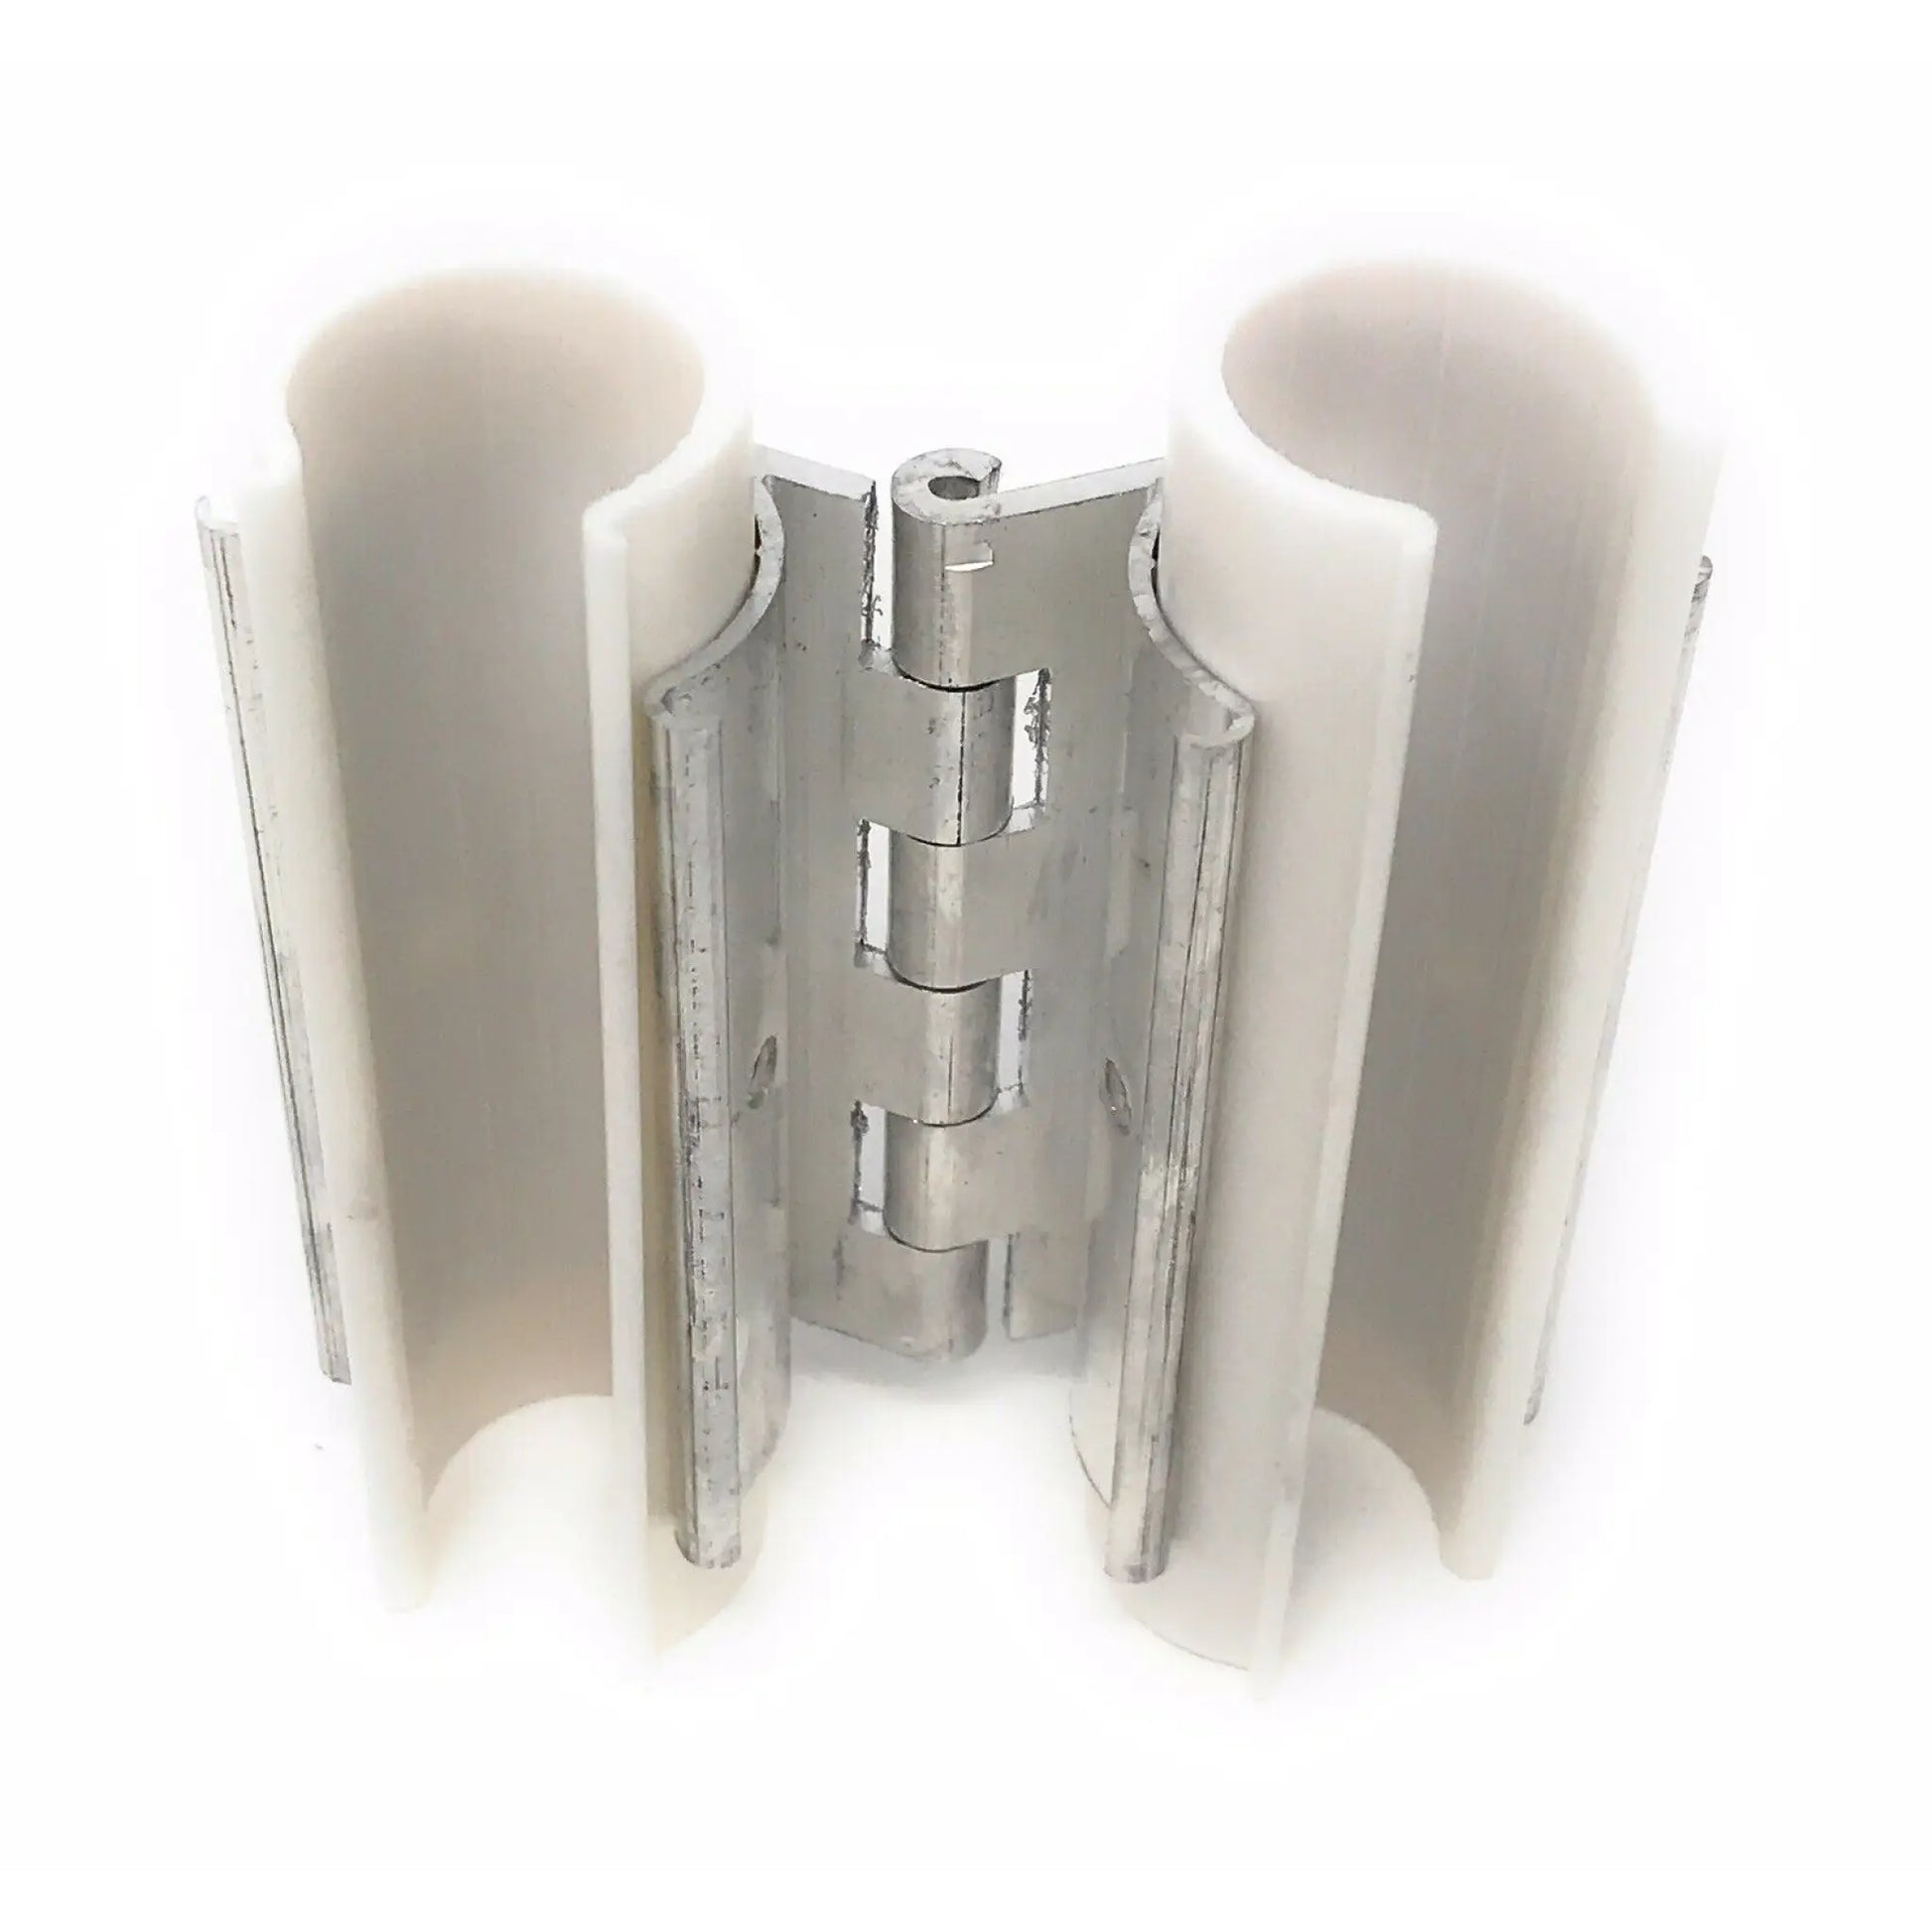 Aluminum Snap on Hinges for PVC pipes - 1/2